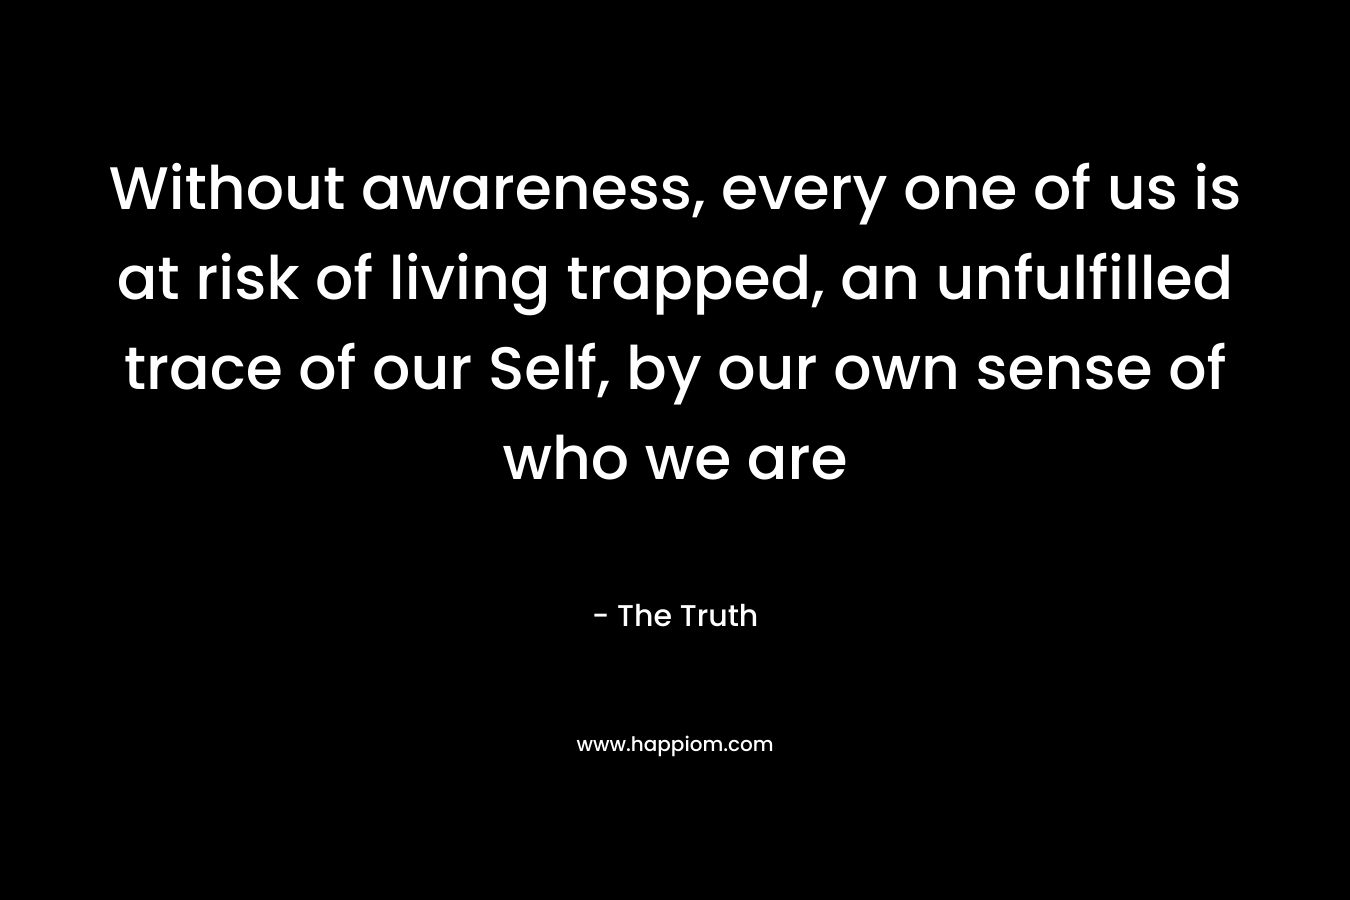 Without awareness, every one of us is at risk of living trapped, an unfulfilled trace of our Self, by our own sense of who we are – The Truth